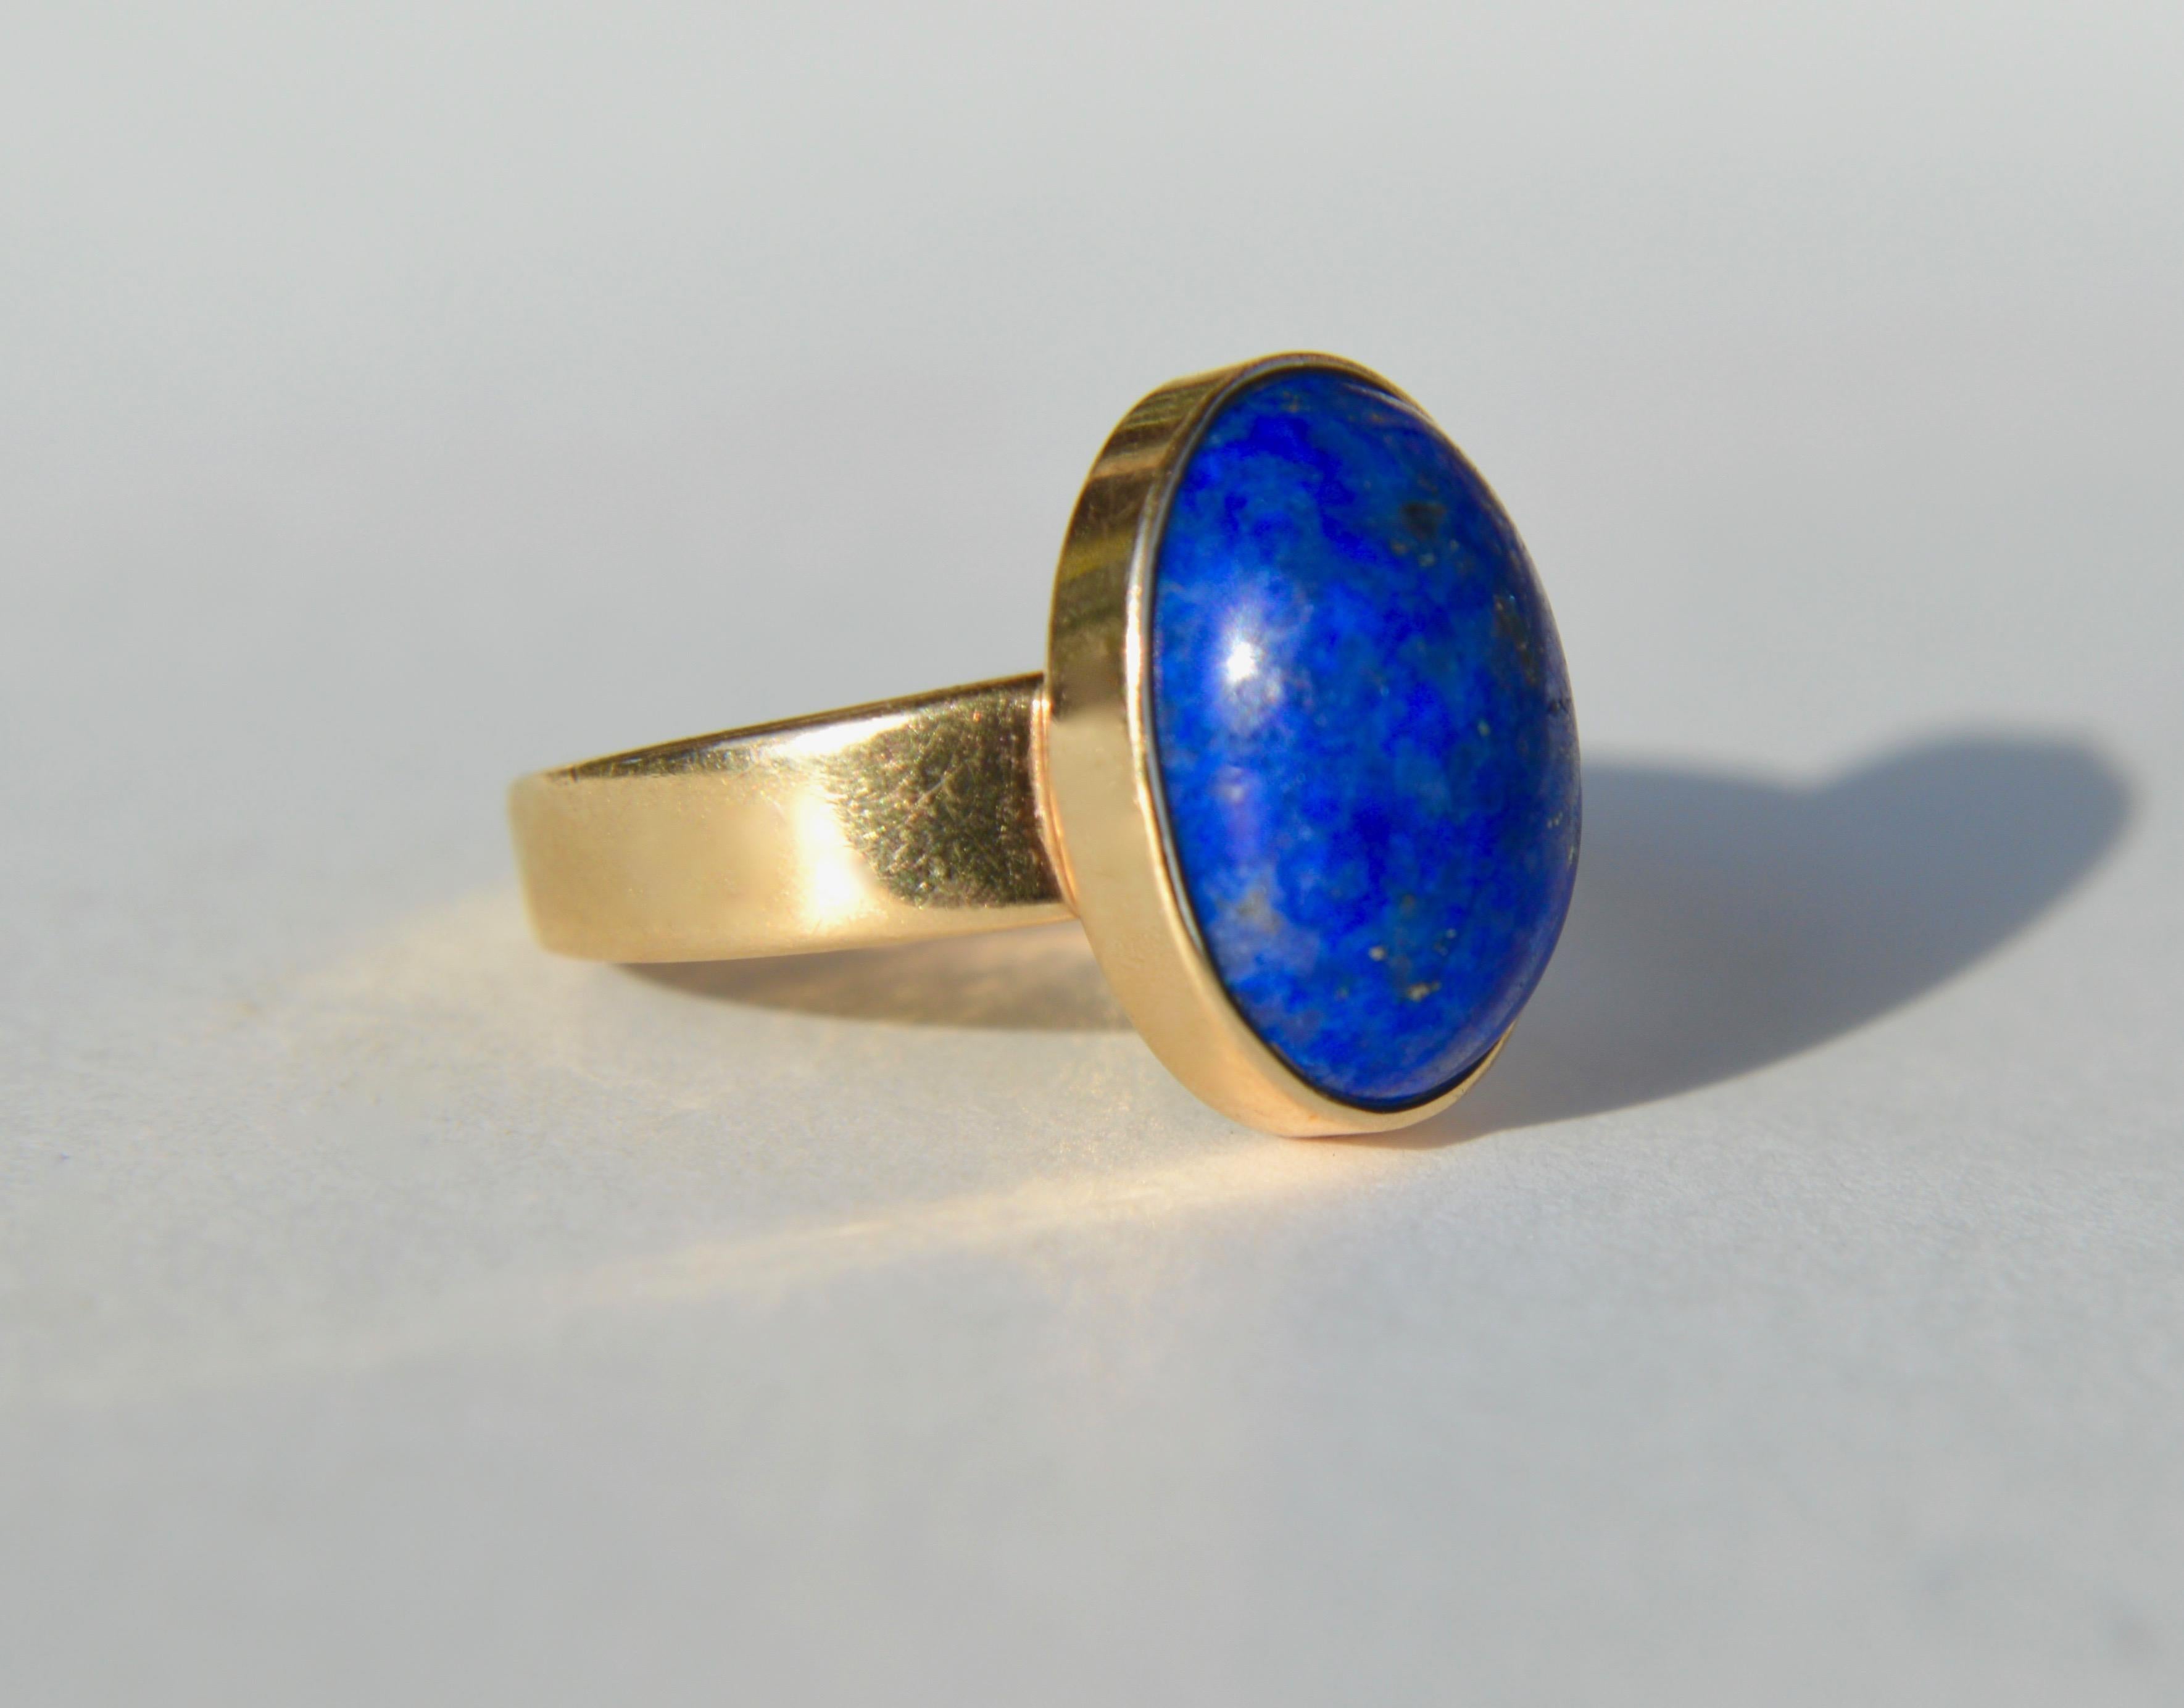 Beautiful modern vintage circa 1960s 5.81 (14x10mm) carat lapis lazuli 14K yellow gold solitaire cabochon ring, Size 6, can be resized by a jeweler. In very good condition. Stamped as 14K gold. 

All items arrive in a black with gold logo gift box.